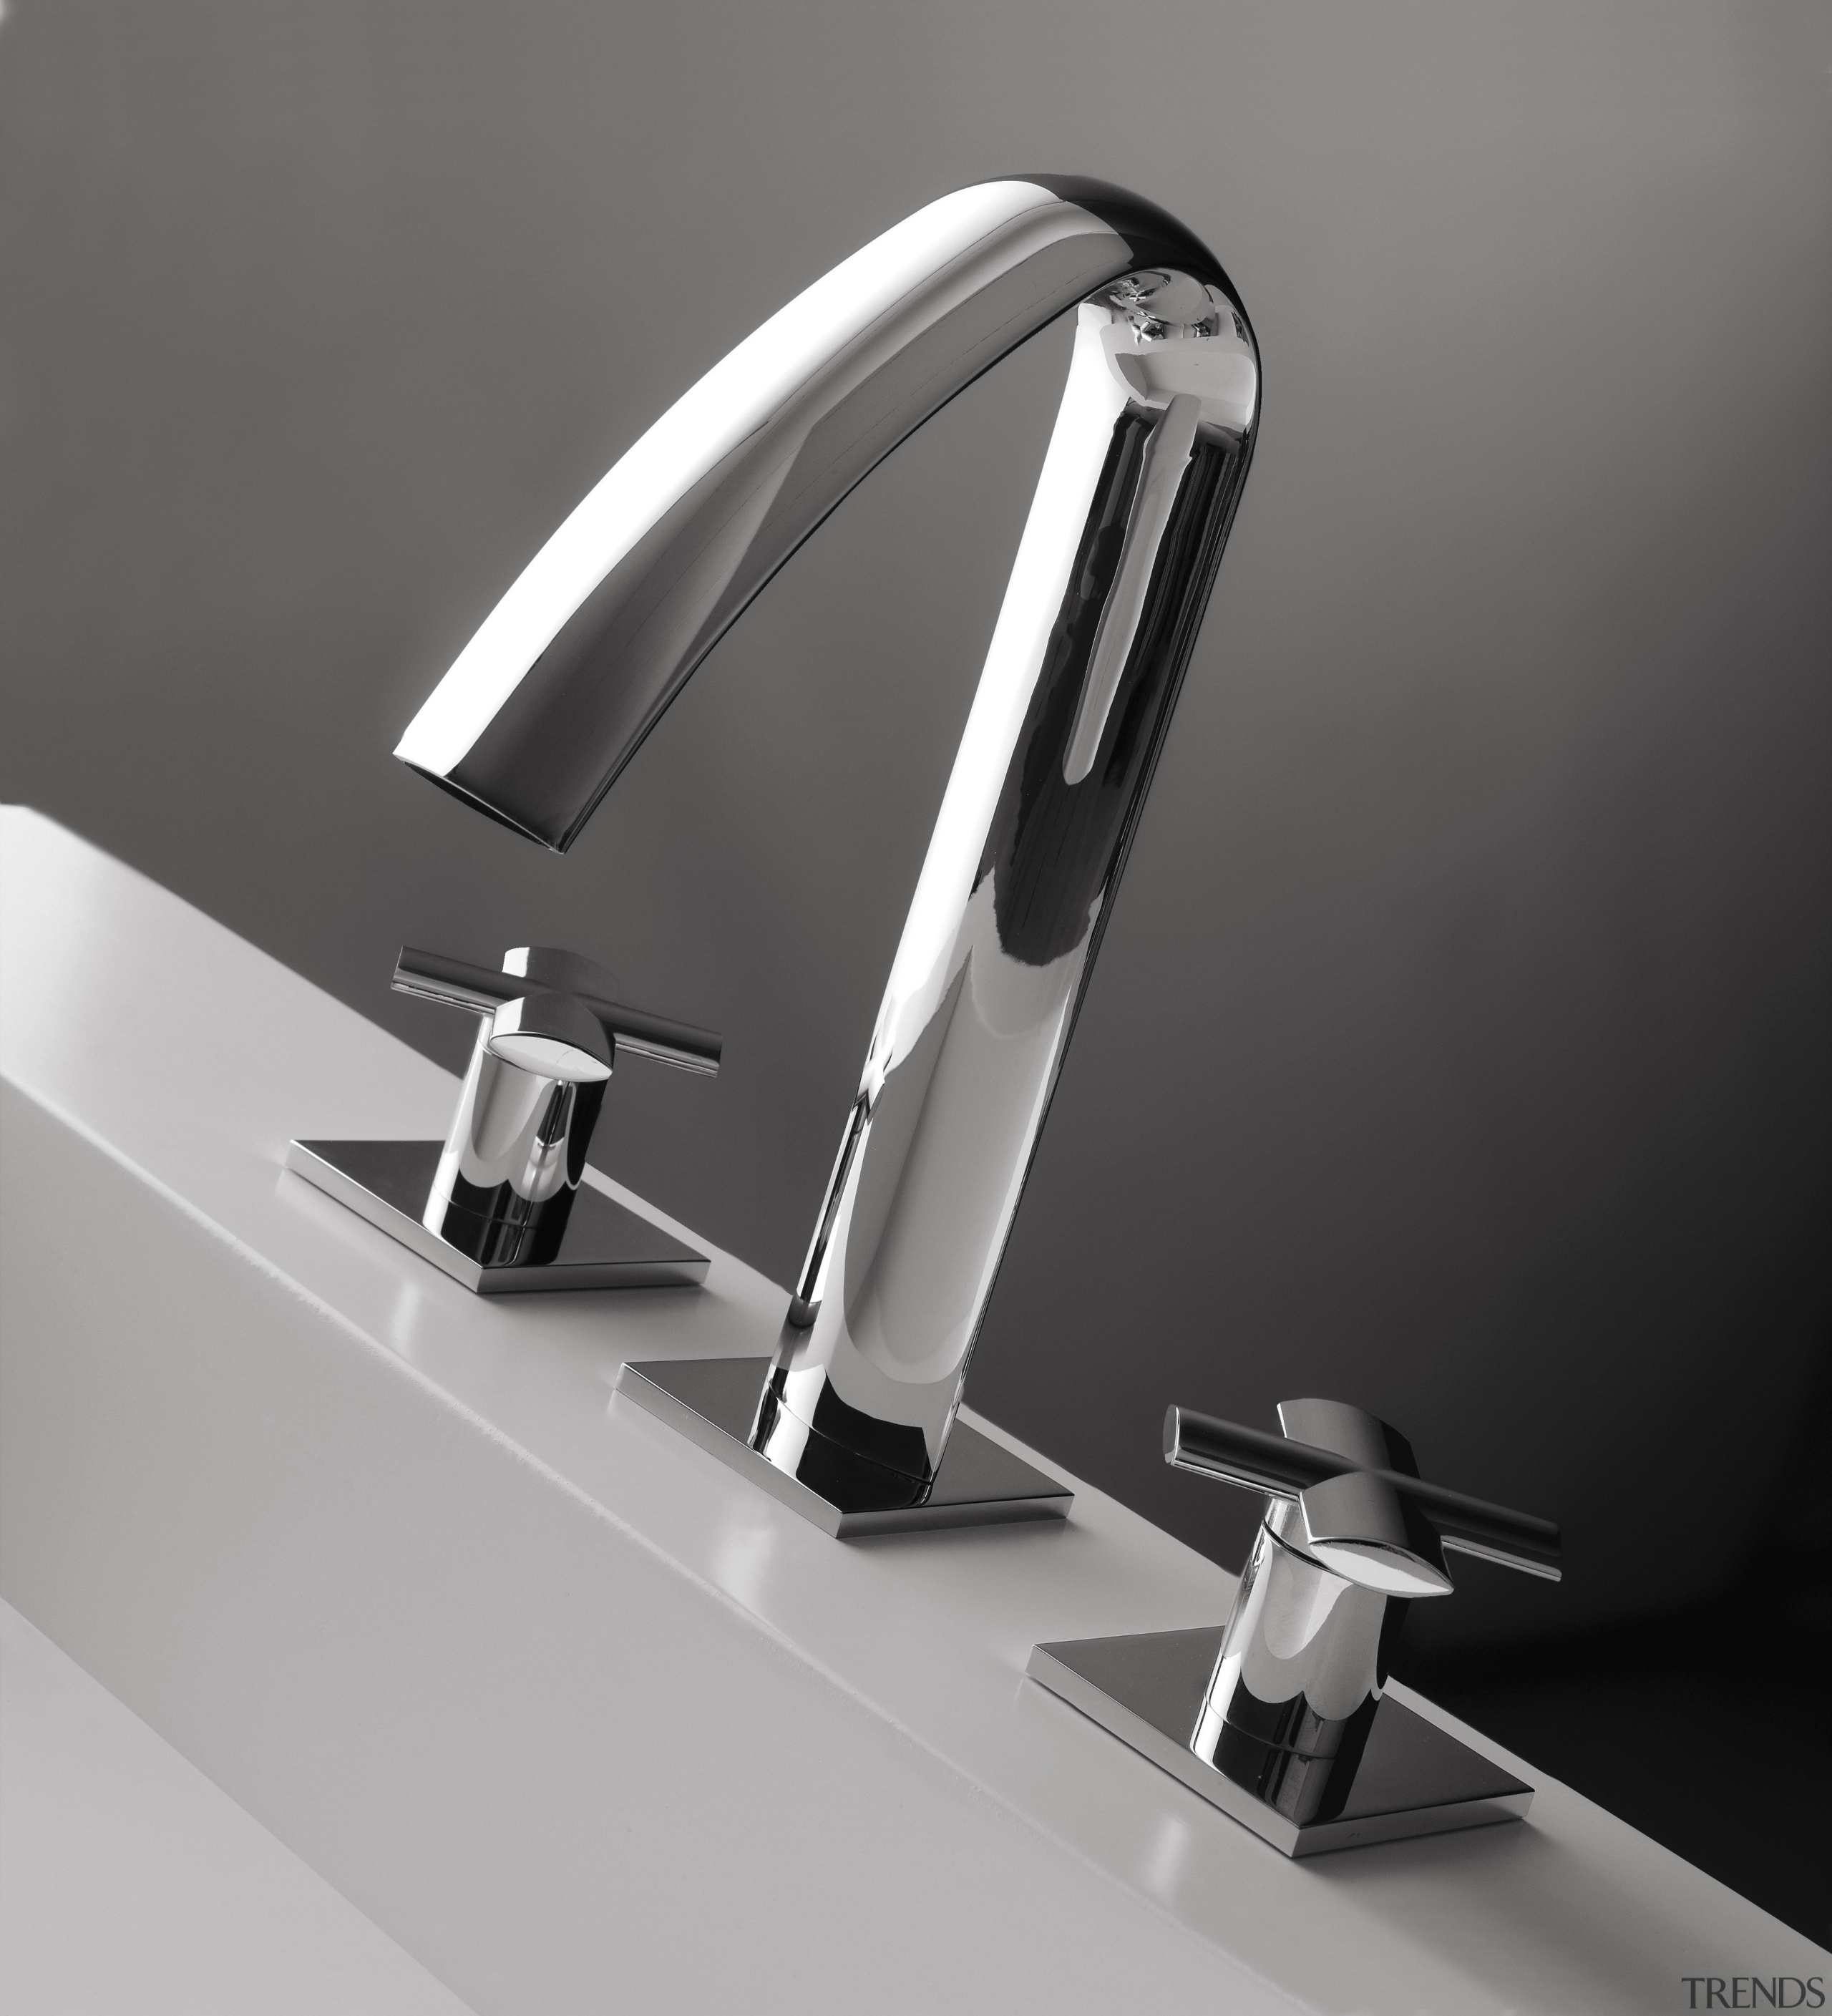 Italian-designed bathroomware, including the Noox series from Zazzeri angle, hardware, plumbing fixture, product, product design, tap, gray, black